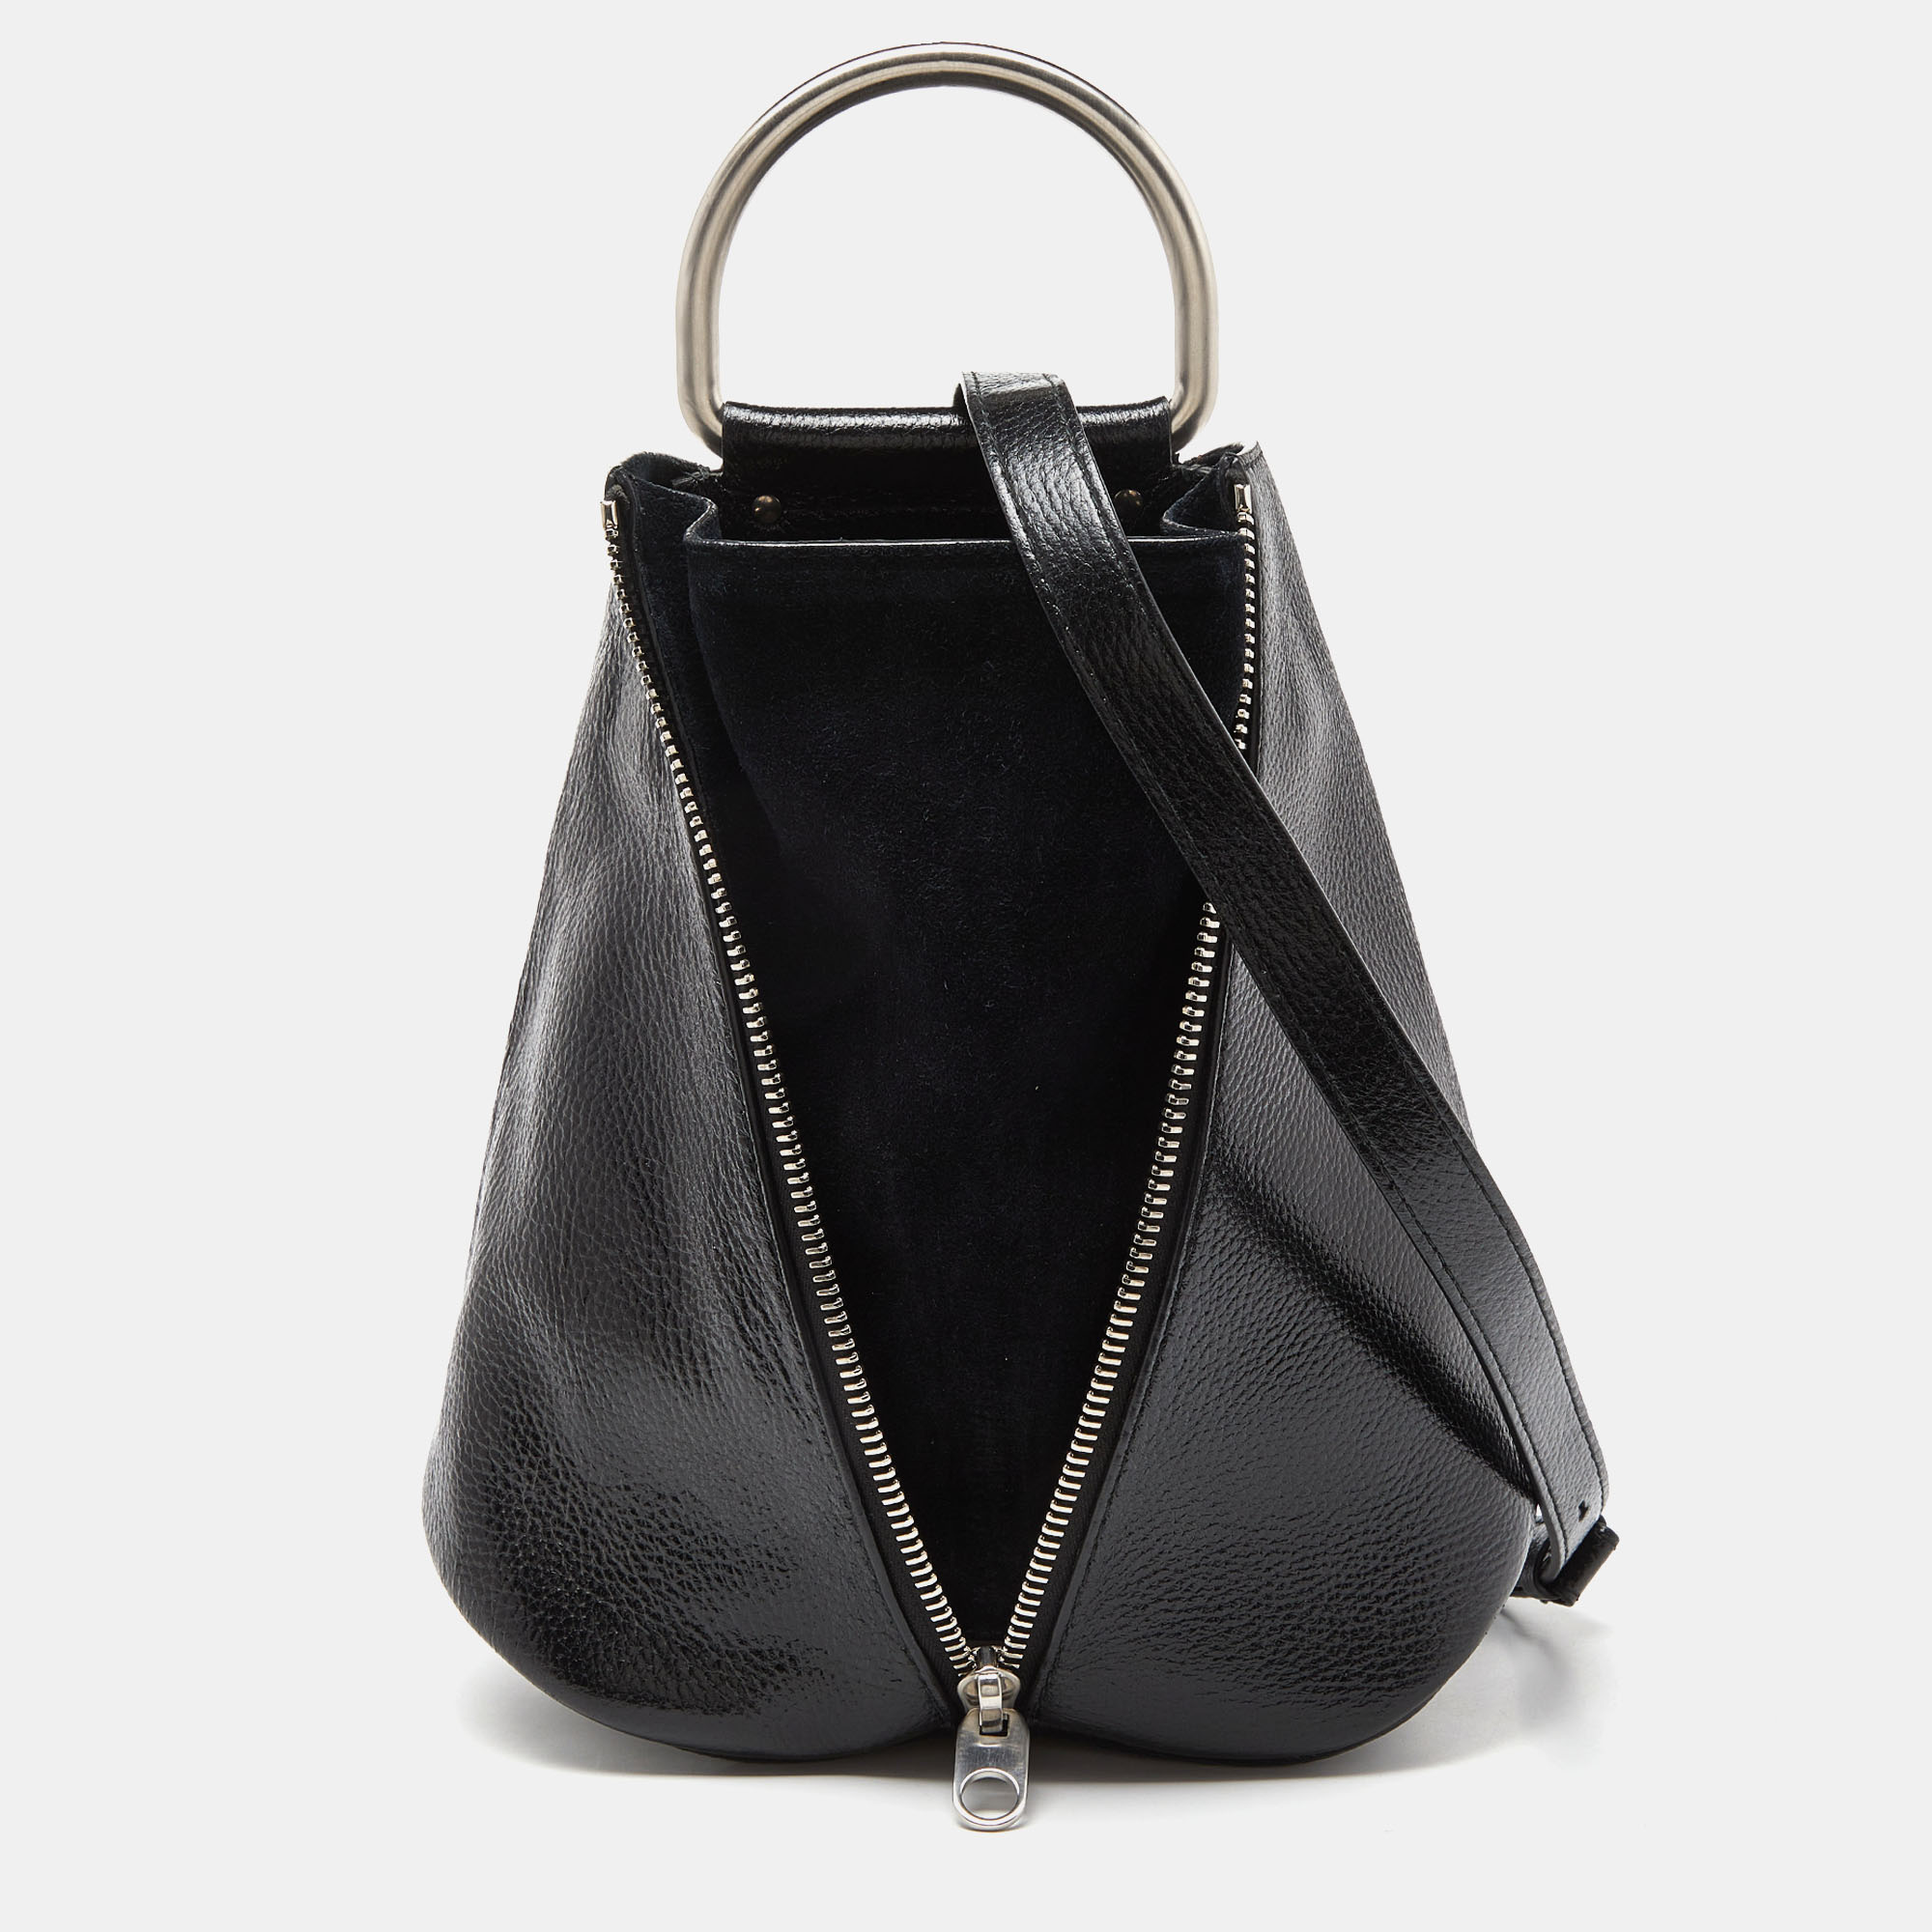 Exuding unparalleled elegance and sophistication this bag is made from the finest material in a gorgeous hue. While the roomy interior offers ample space the top handle allows you to carry it with much elegance.